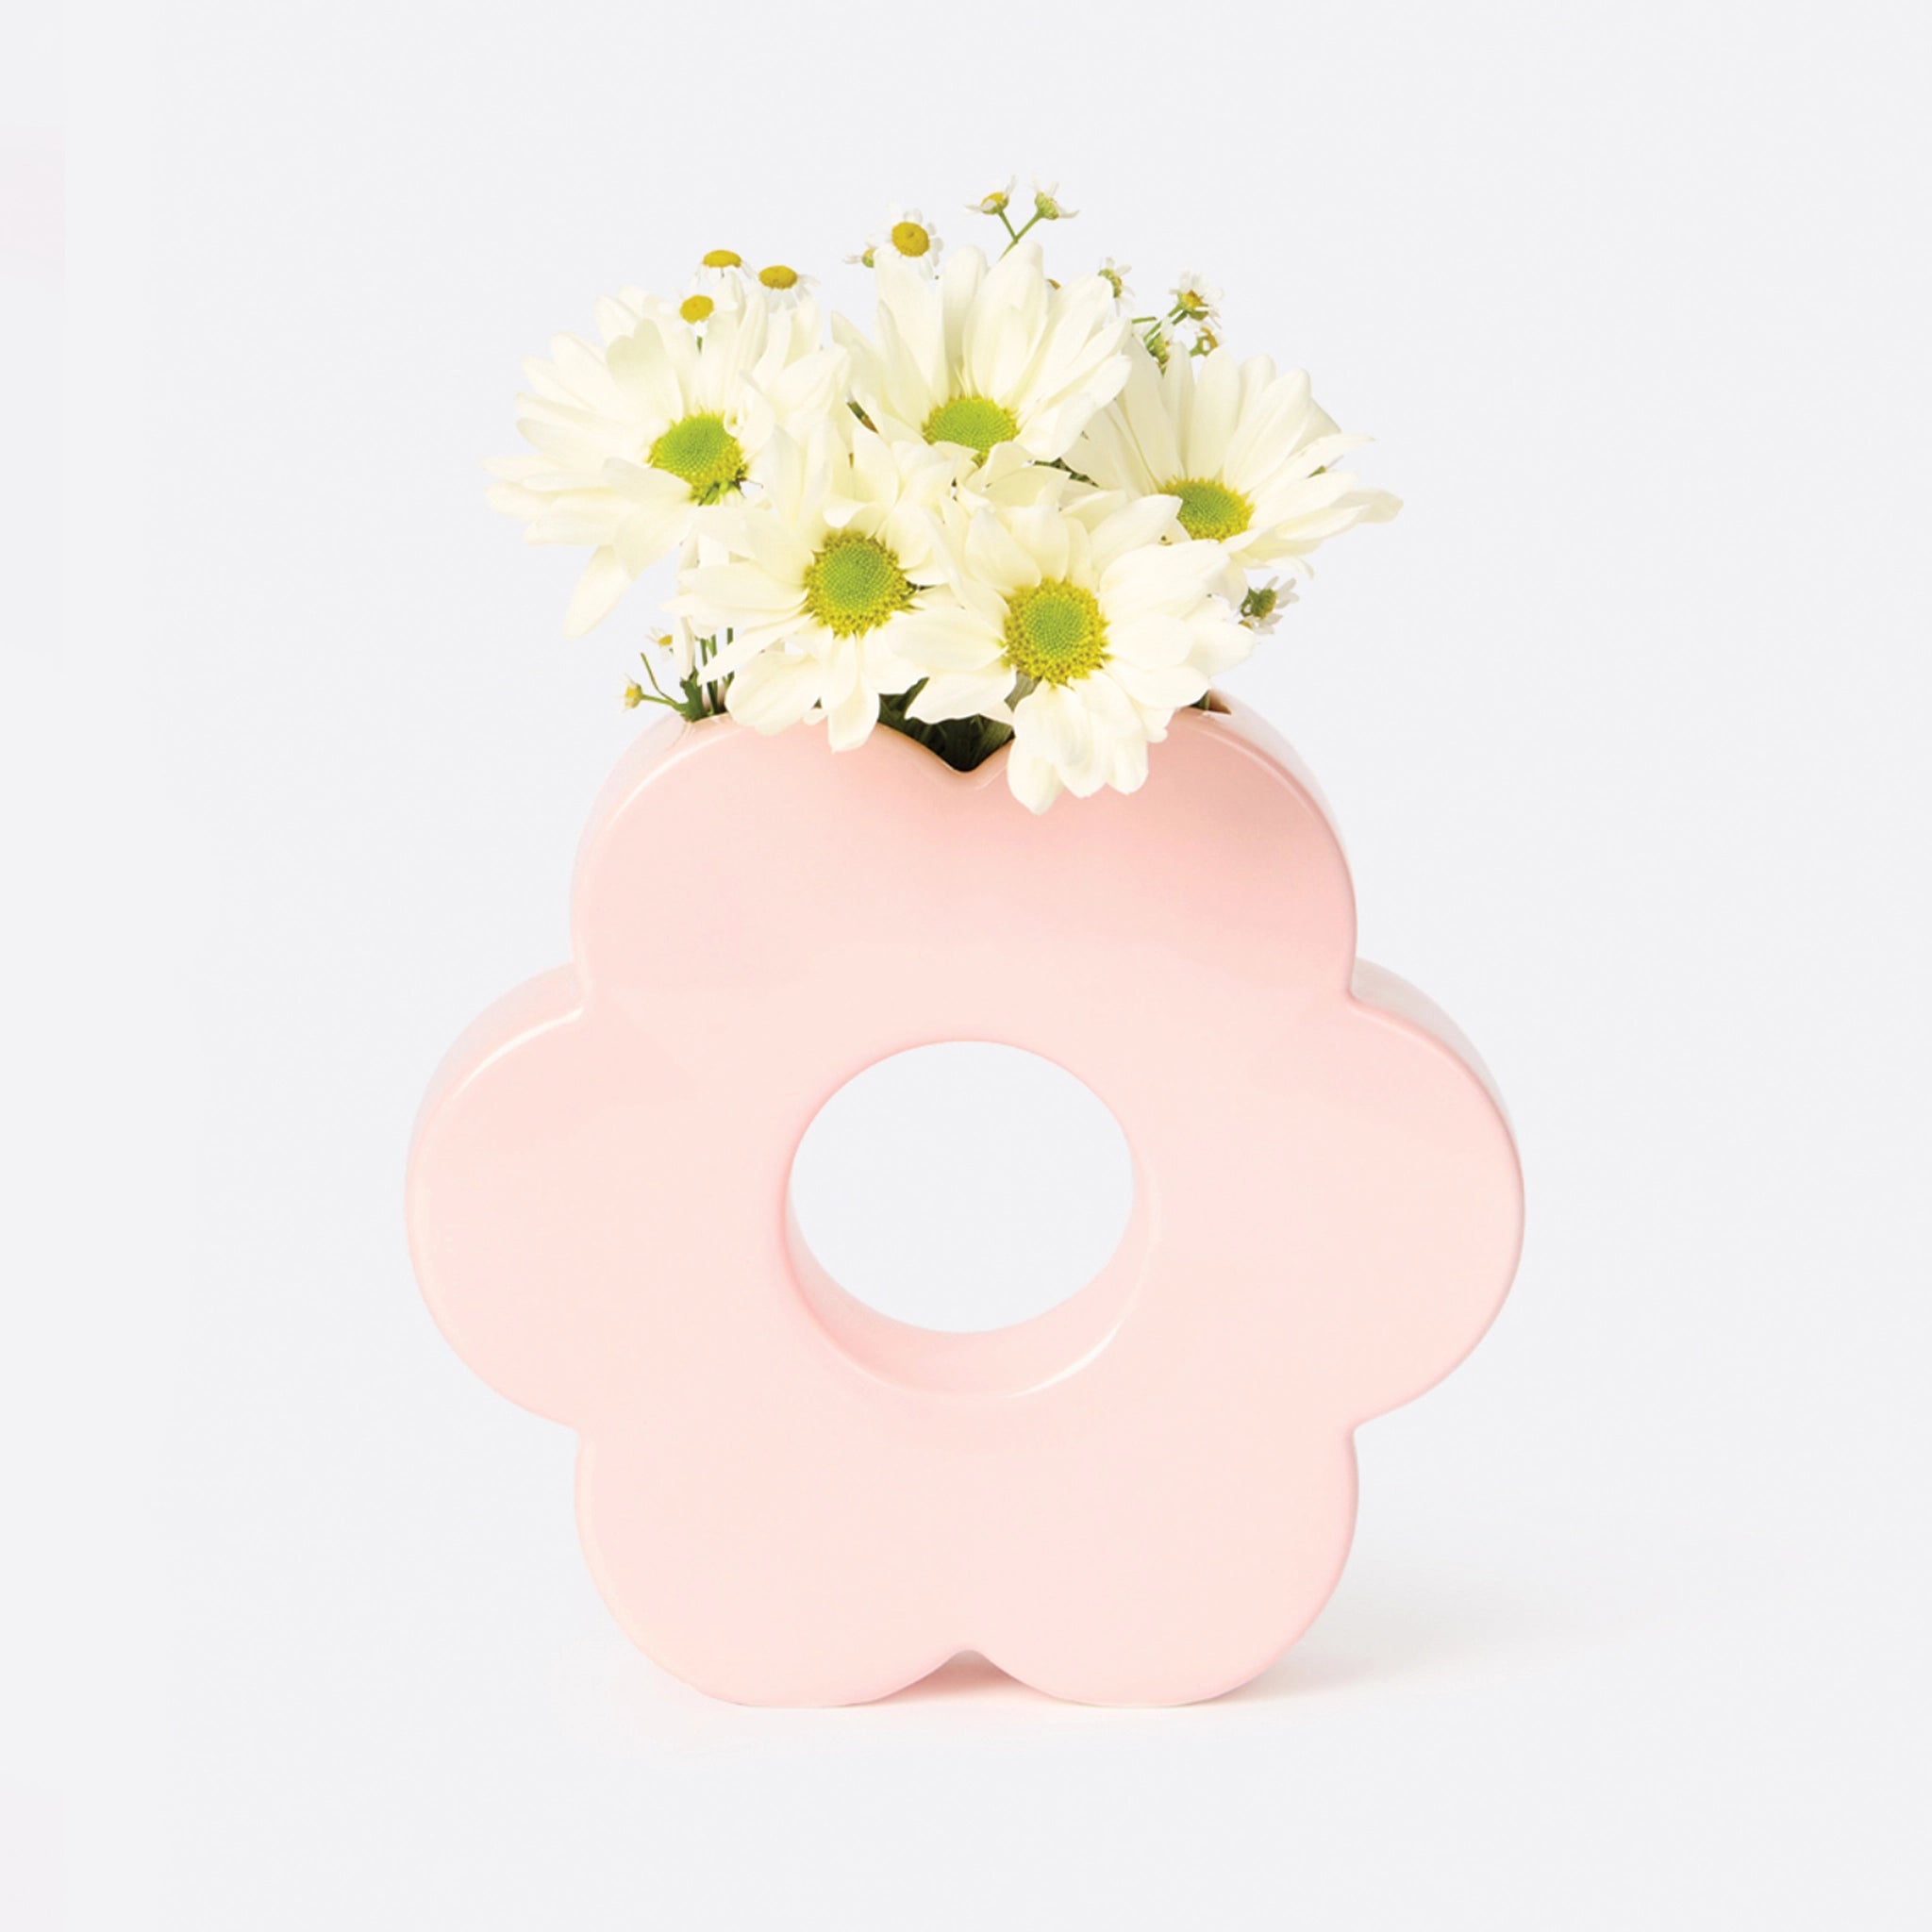 A light pink ceramic vase in the shape of a daisy with an opening in the center and an opening at the top to inset plants and floral stems.